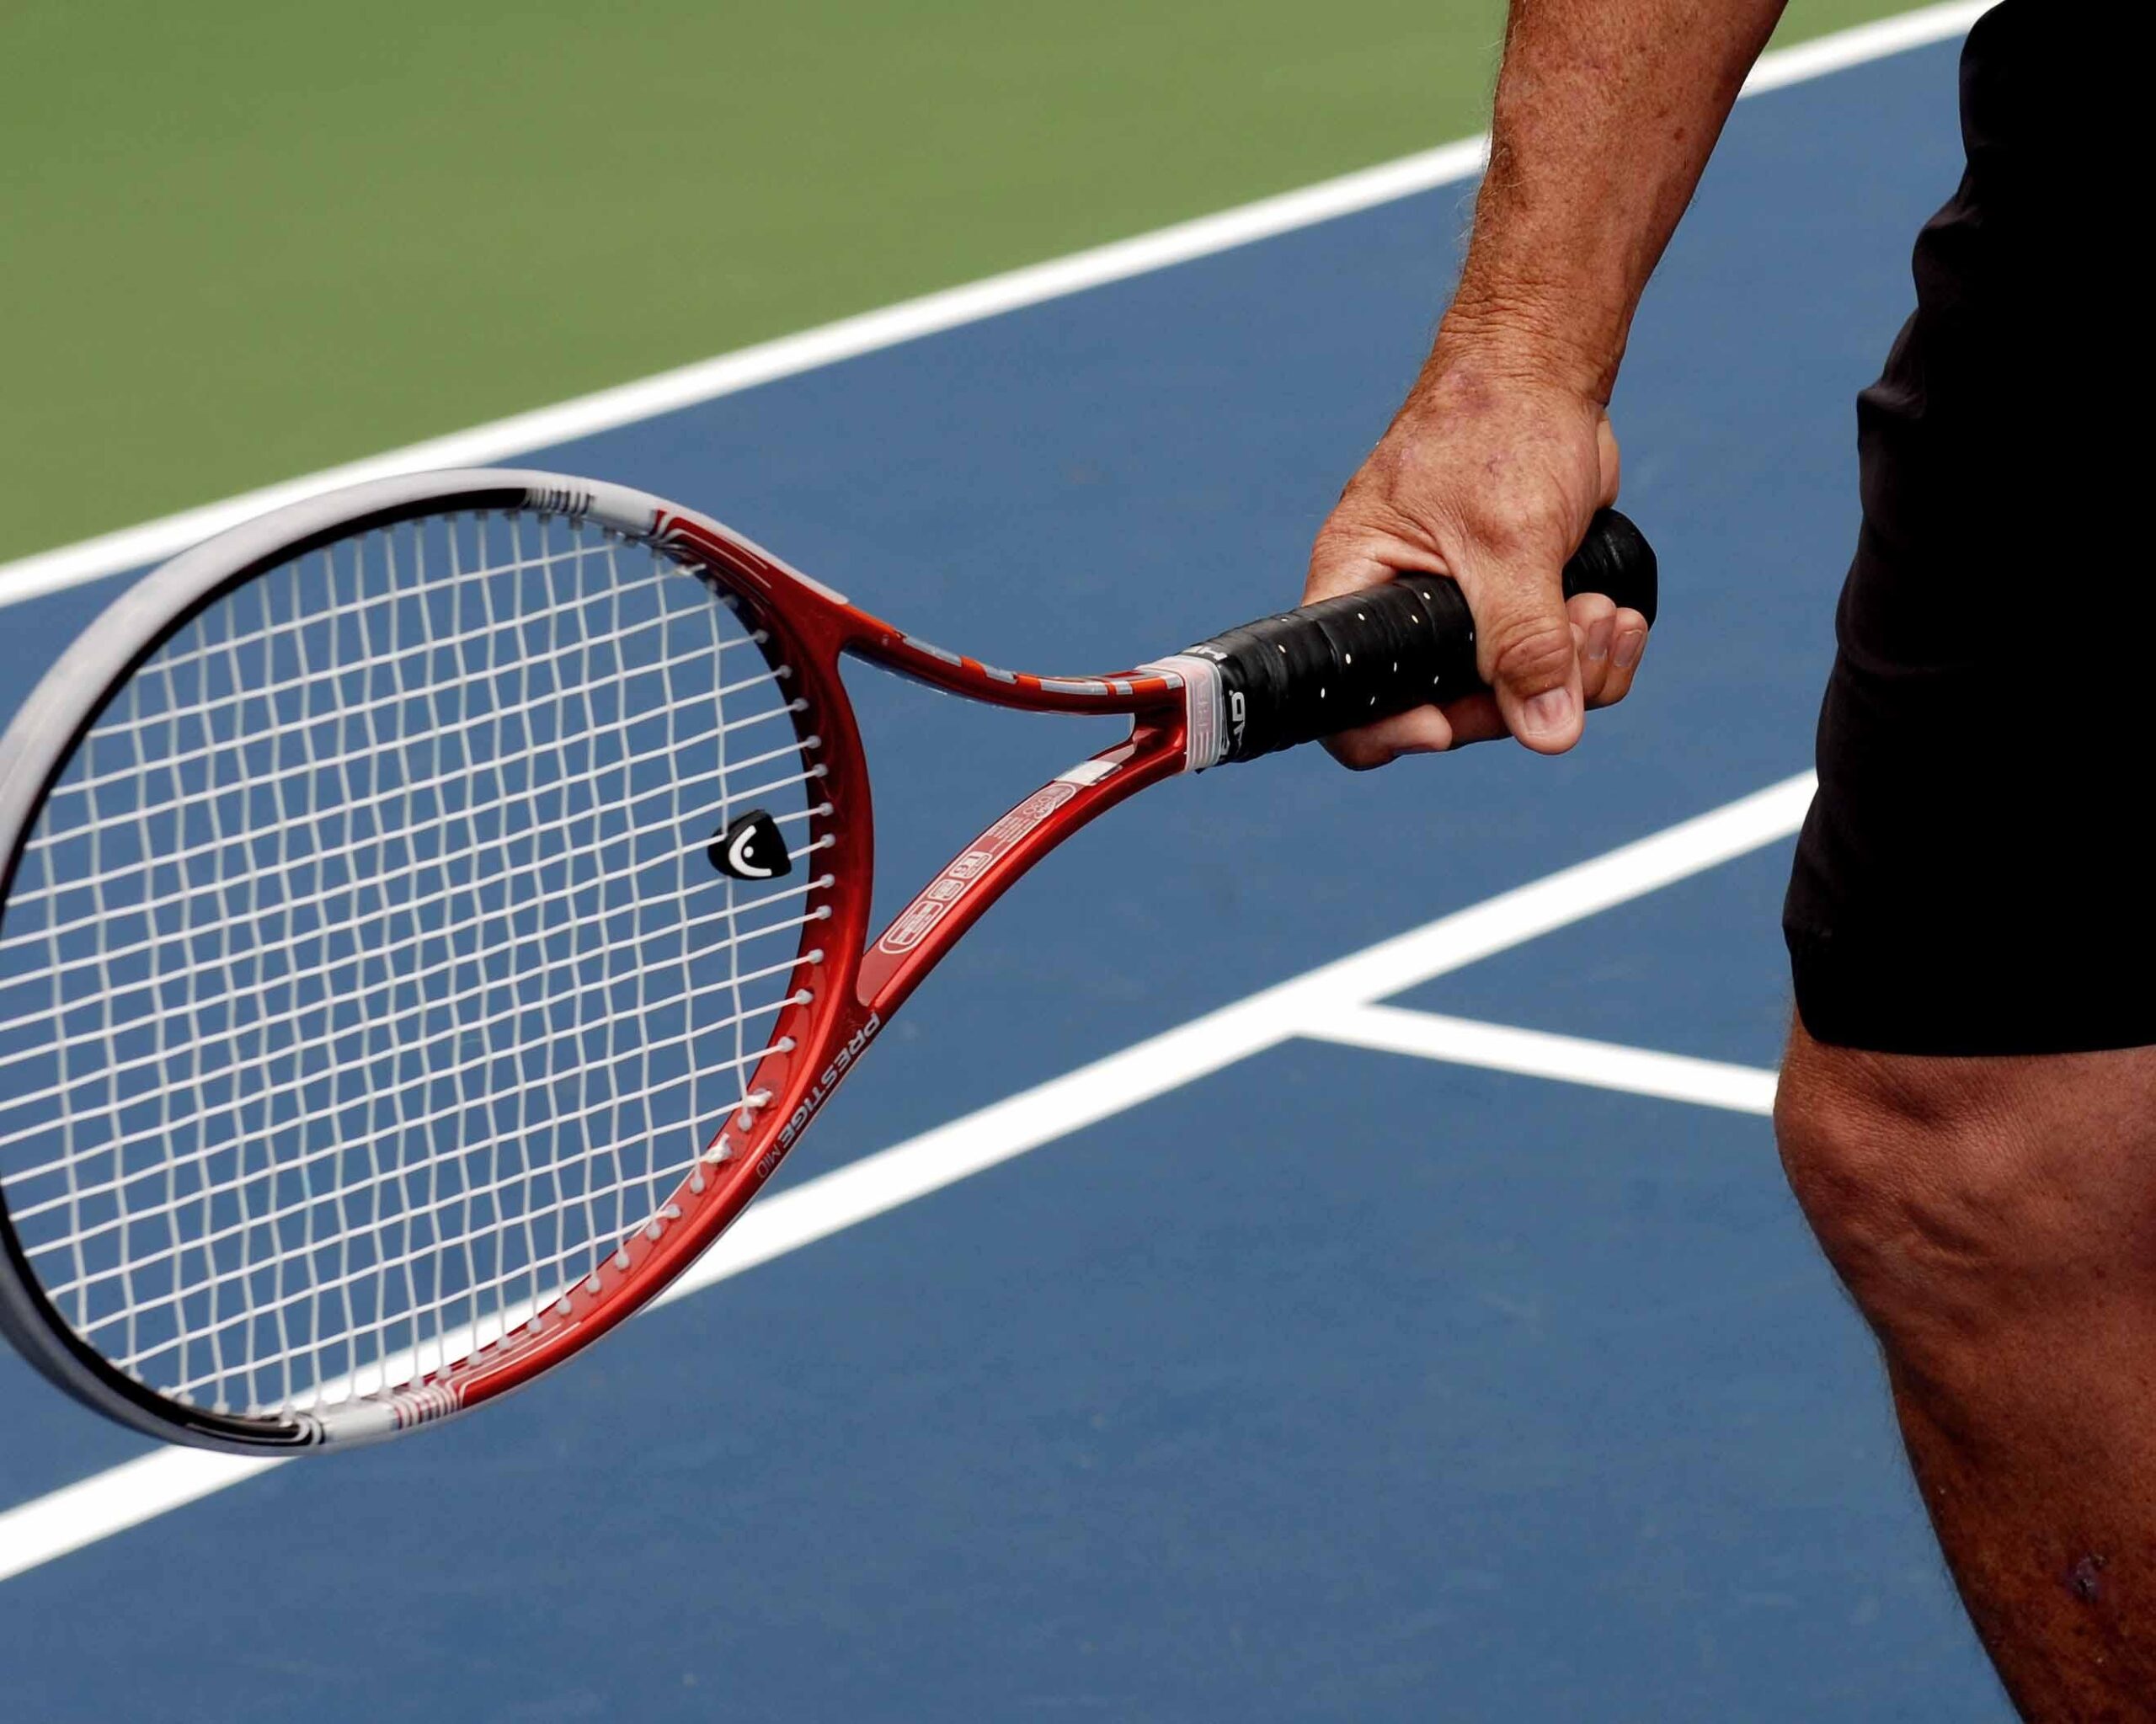 Continental grip (forehand)